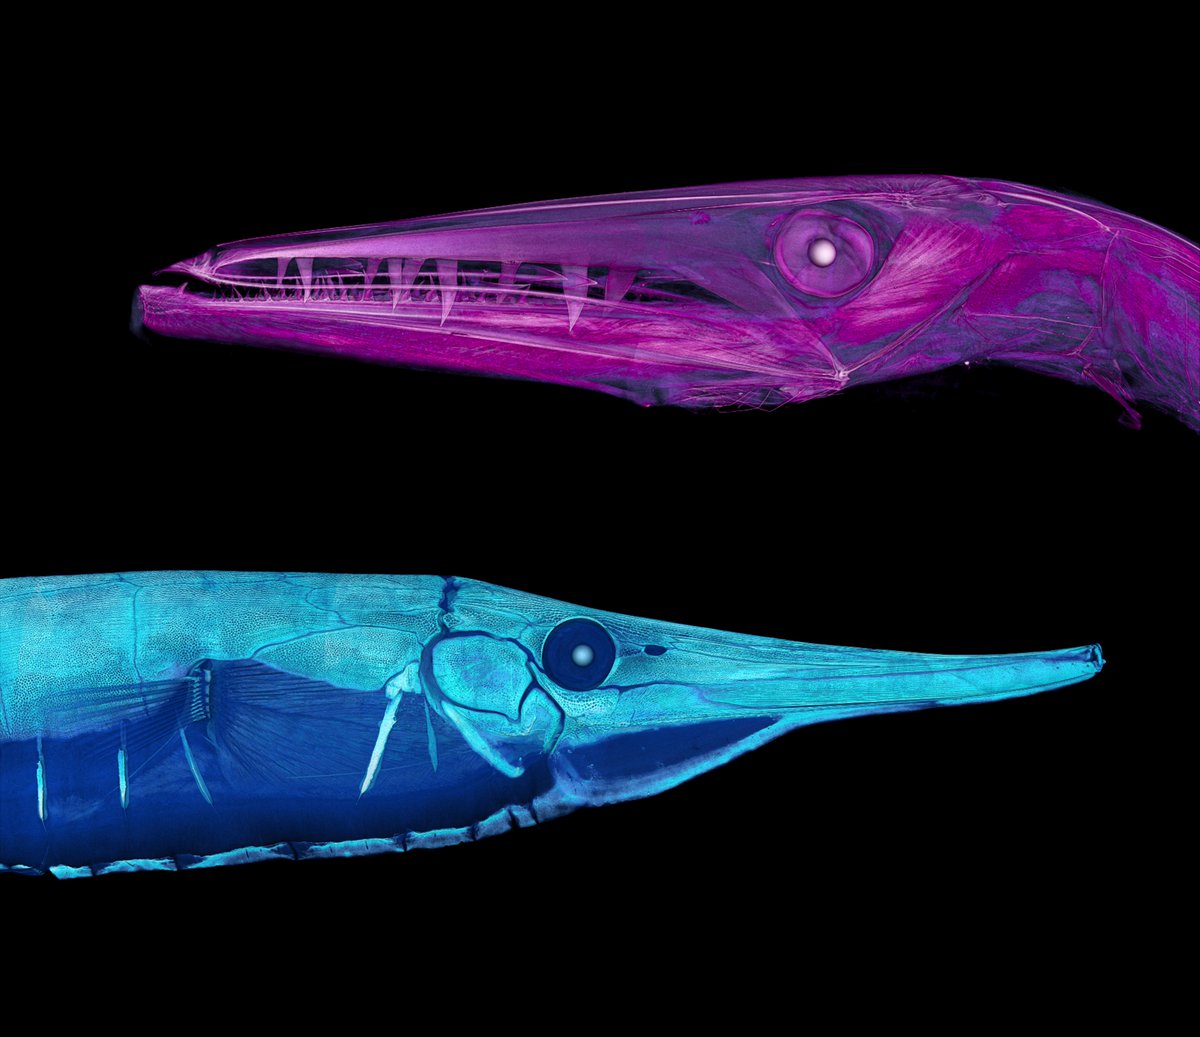 Museum collections are going digital. 📱 The collaborative #NSFfunded openVertebrate Thematic Collections Network 3D has imaged over 13,000 vertebrate specimens and has made them freely available online. bit.ly/3TFahDR #oVertTCN